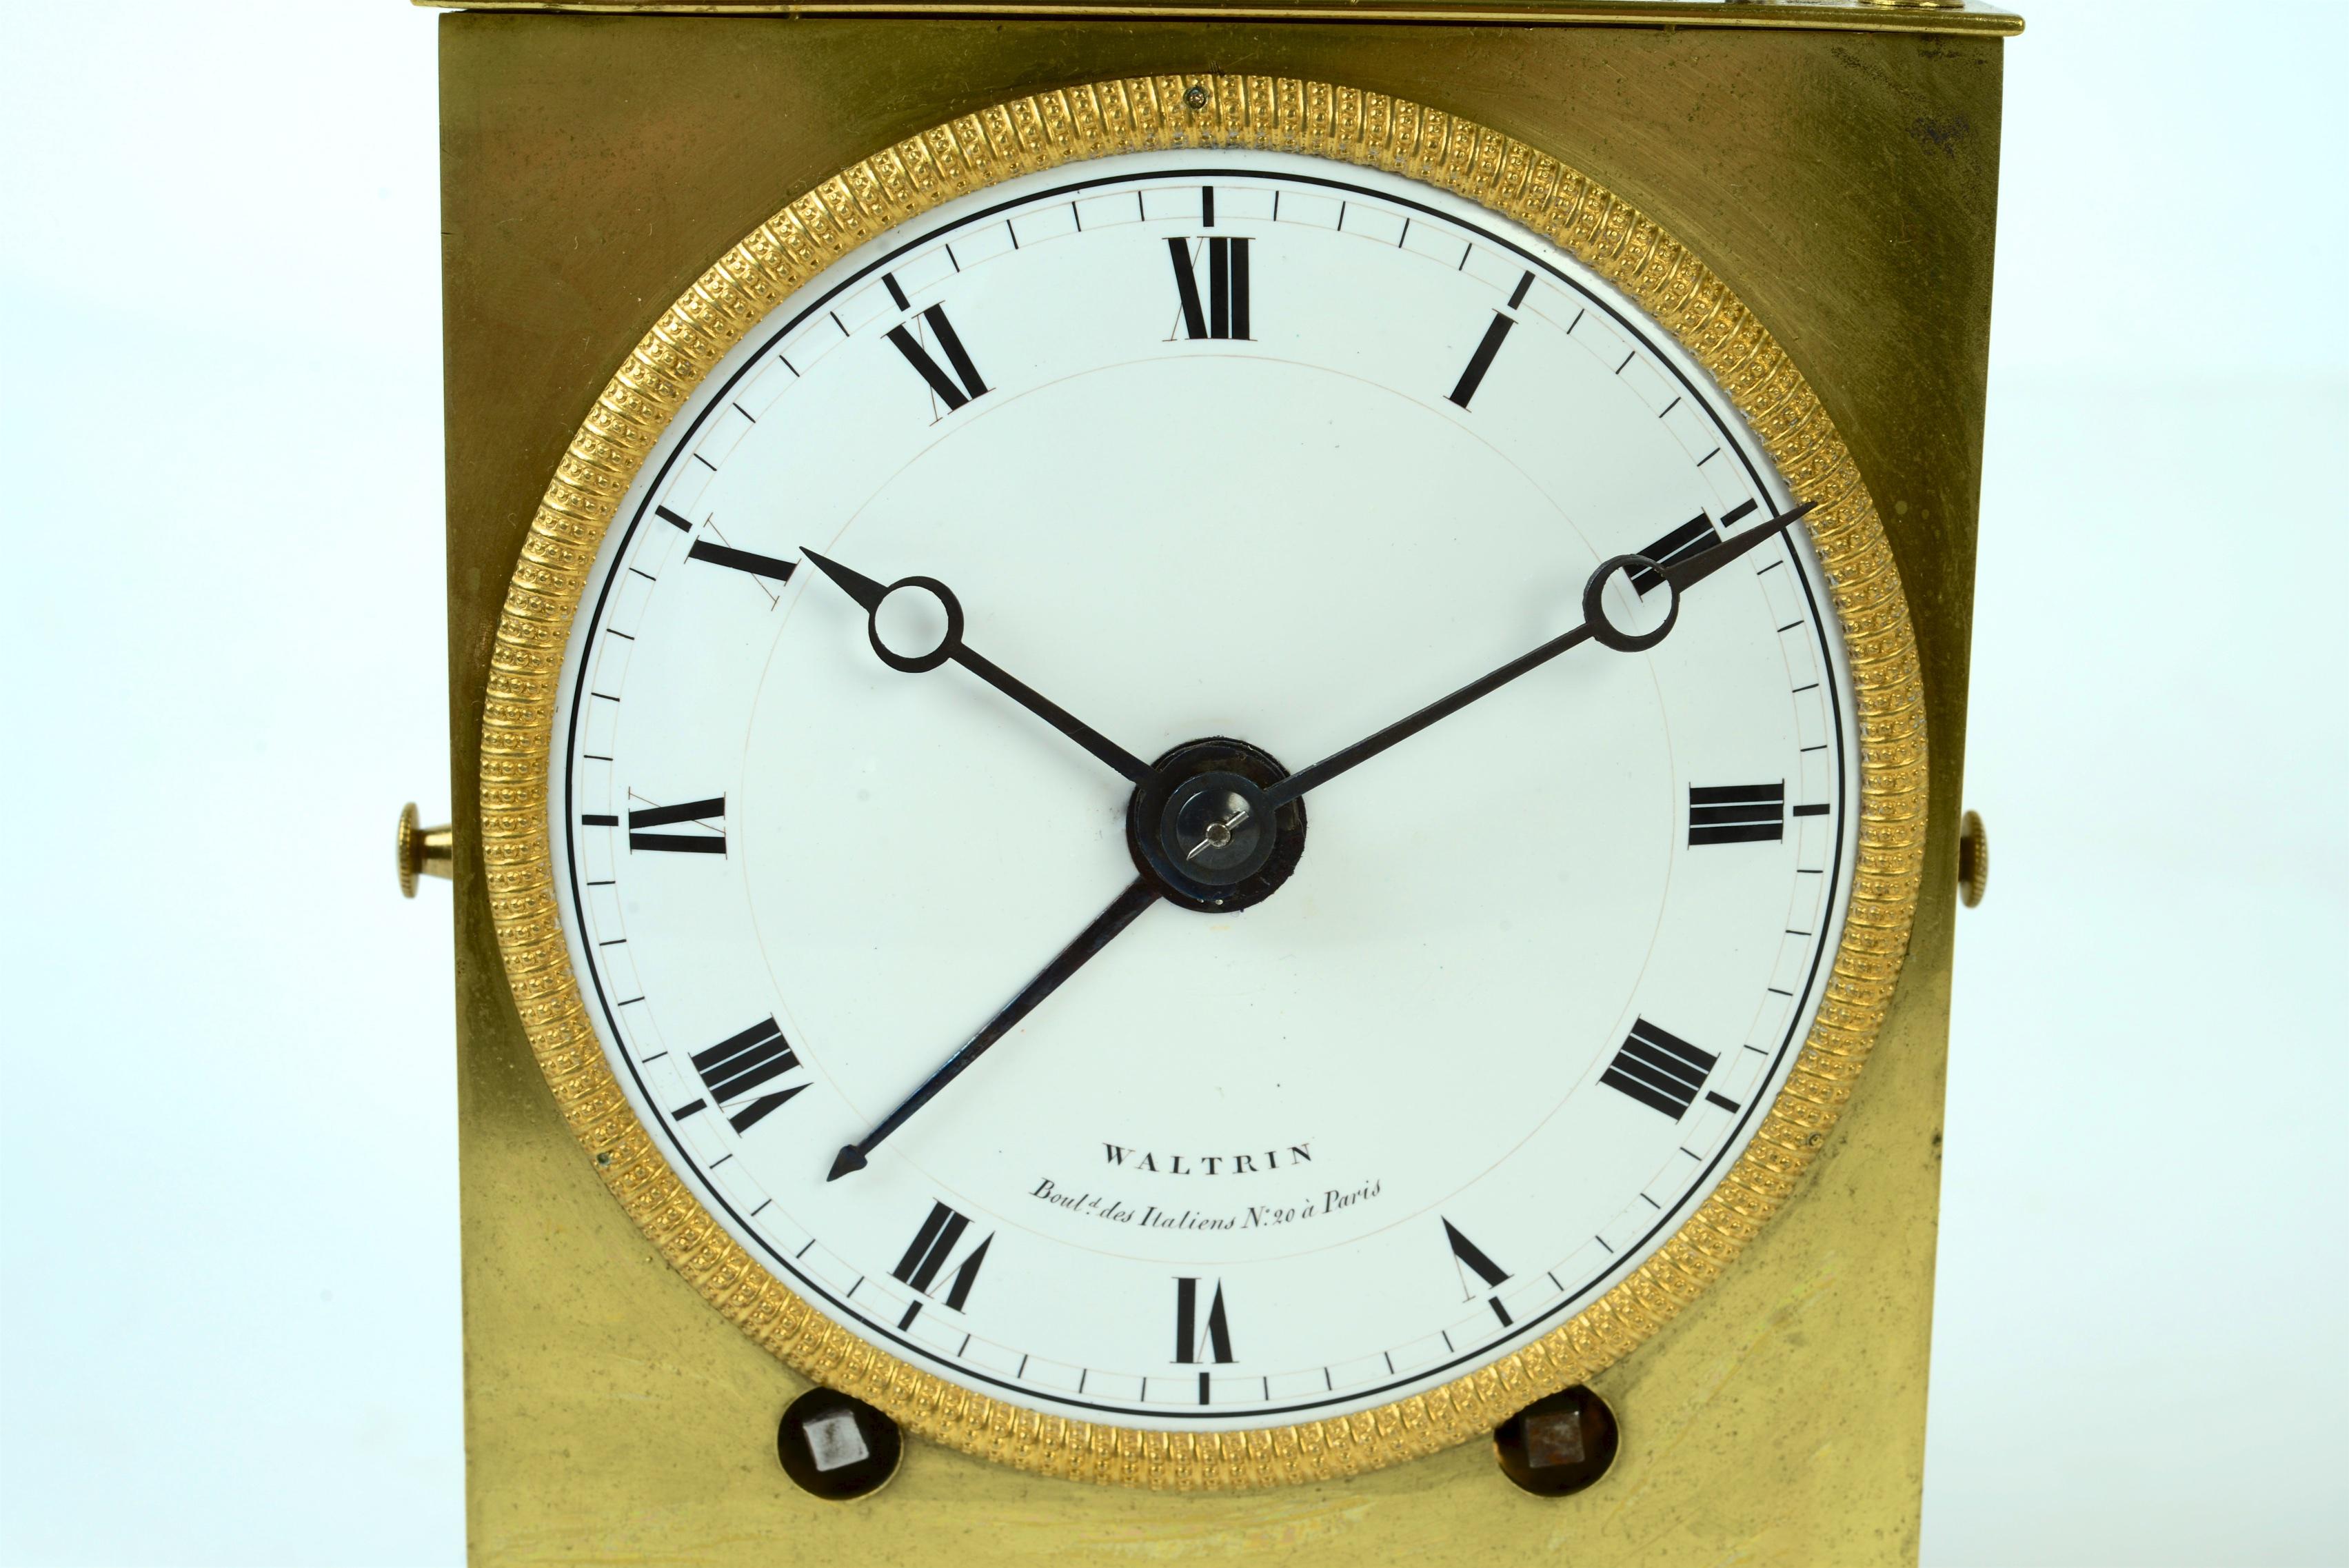 Early 19th century Capucine French Officer's clock, circa 1800 by Waltrin. These clocks have a morbier type movement. They strike once on the 1/2 hour and strike the full hours on the hour as well as again sticking the full hours 2 minutes after the